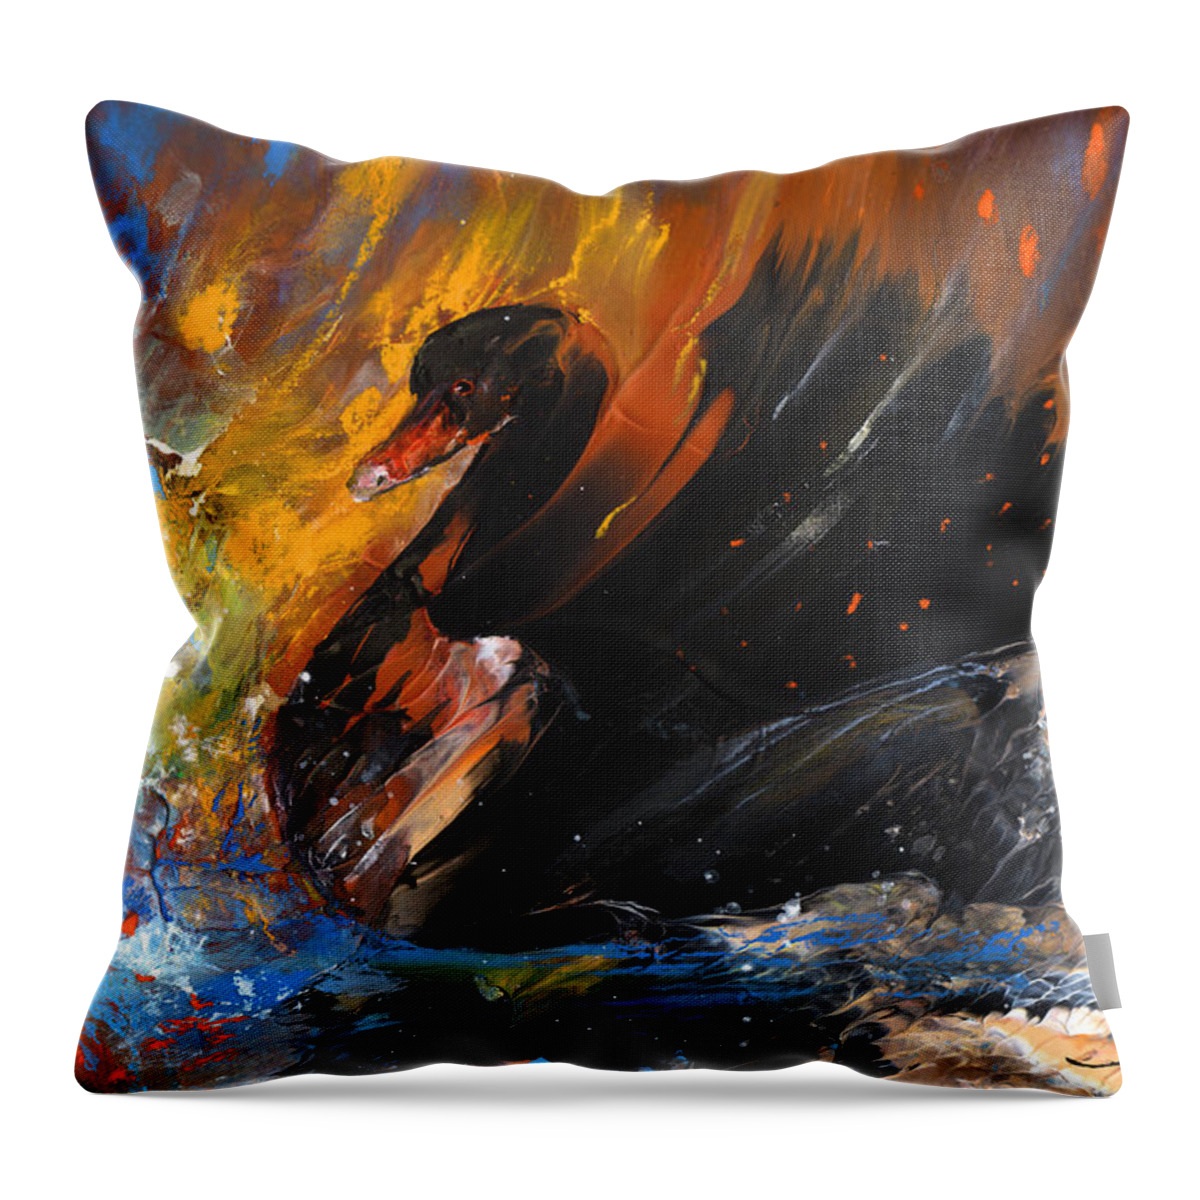 Fantasy Throw Pillow featuring the painting The Black Swan by Miki De Goodaboom